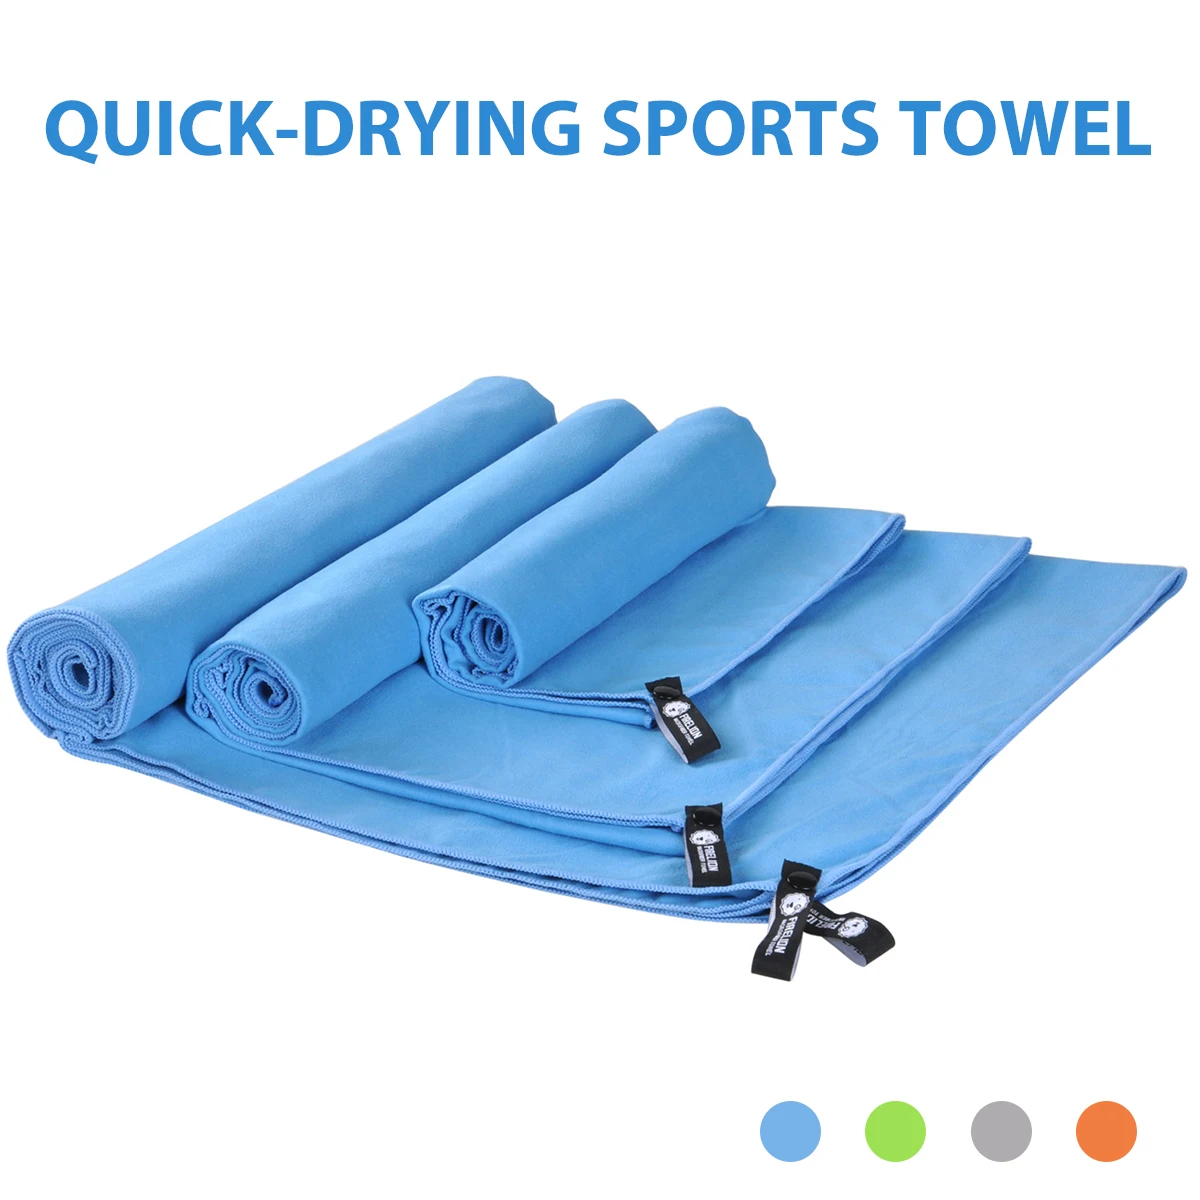 Microfiber Towel GYM SPORT FOOTY TRAVEL CAMPING HIKING Quick DRYING MICROFIBRE 